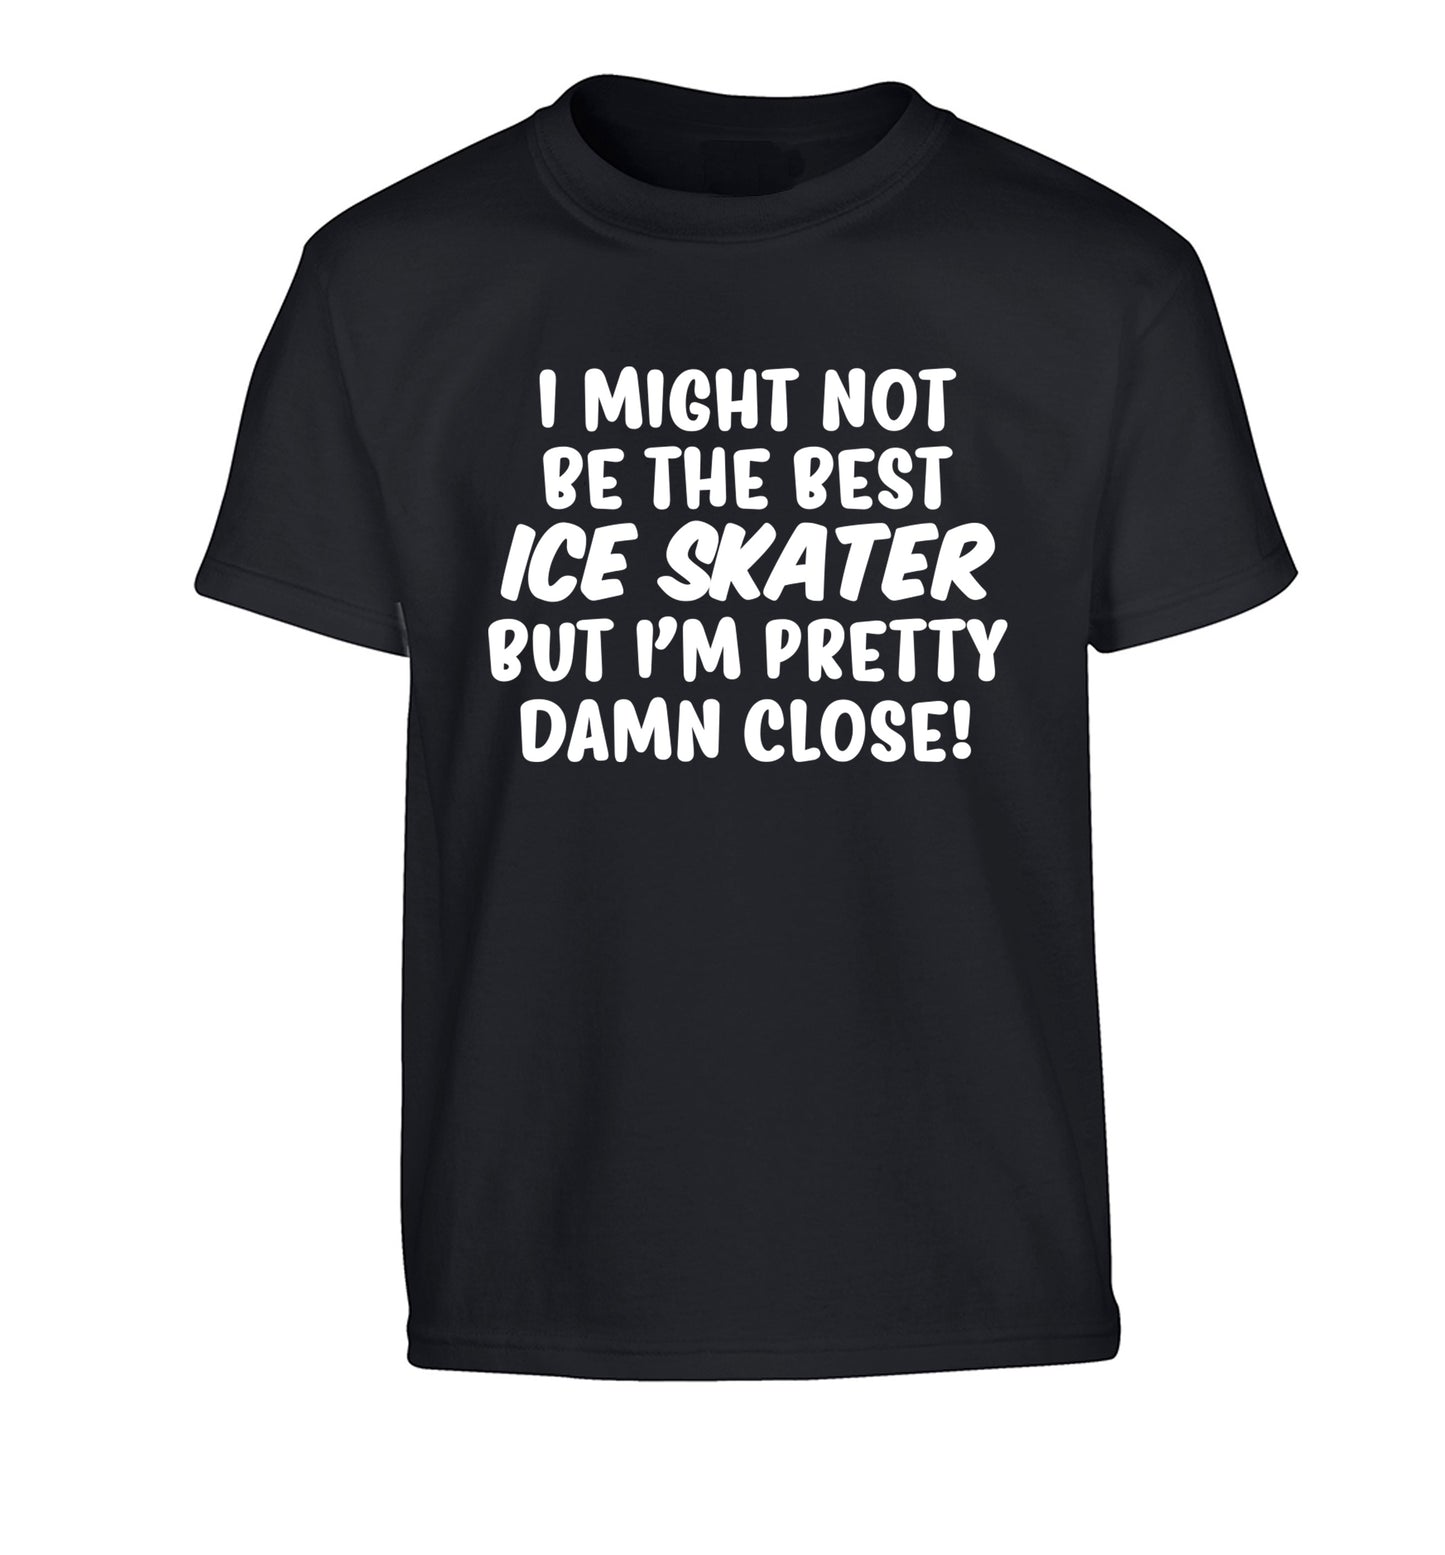 I might not be the best ice skater but I'm pretty damn close! Children's black Tshirt 12-14 Years